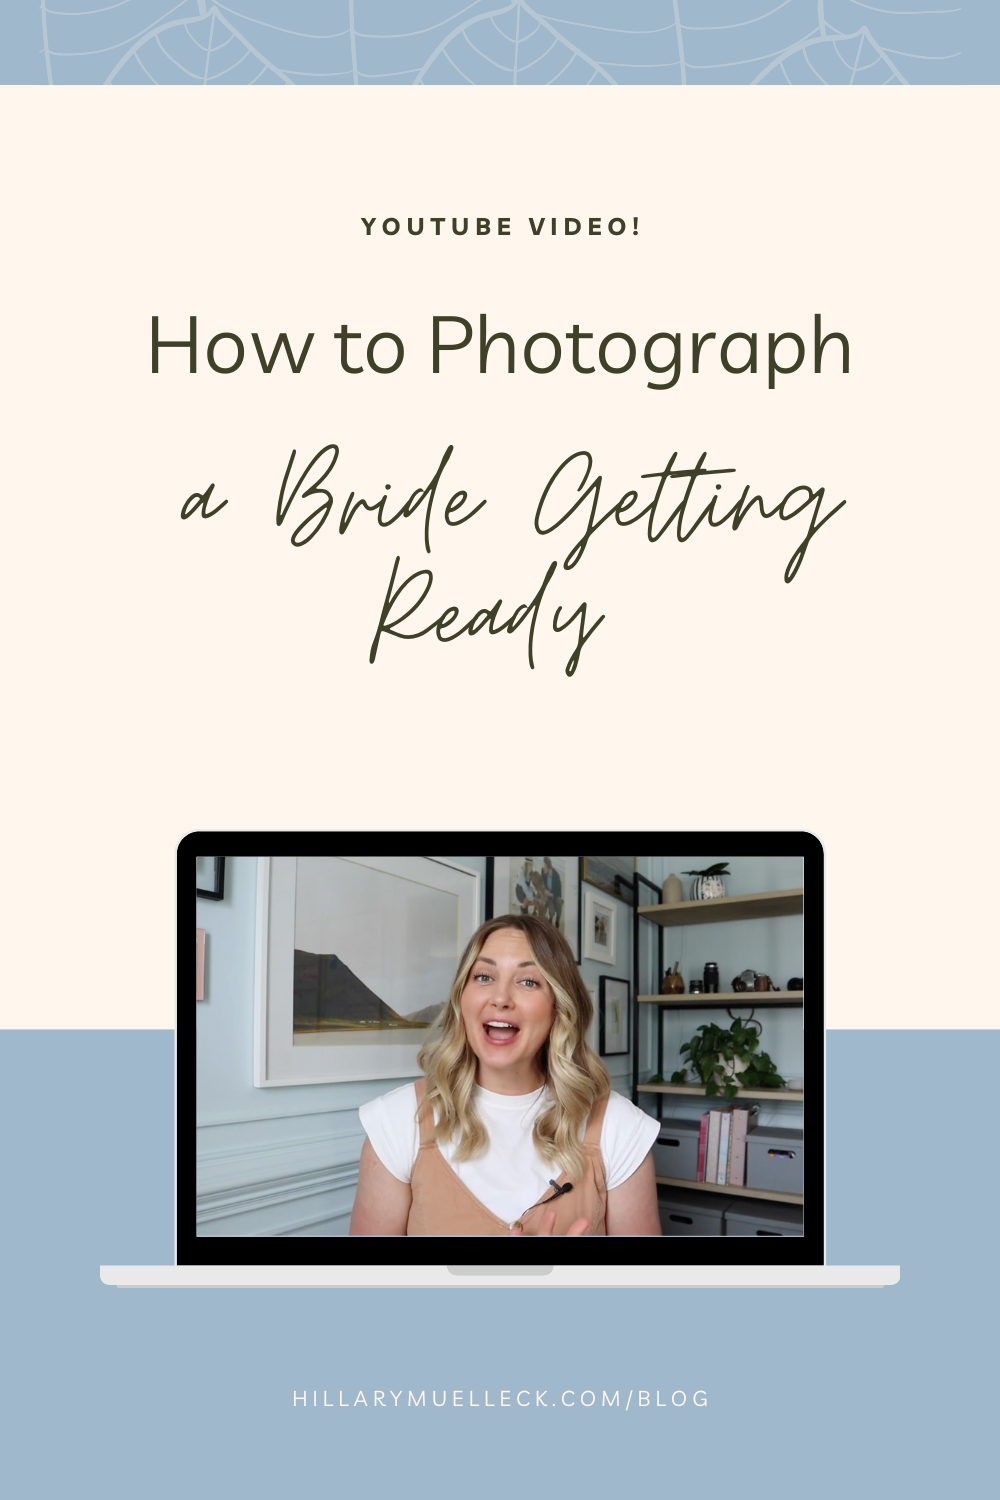 Wedding photographer Hillary Muelleck shares her workflow to photograph a bride getting ready during a busy wedding morning